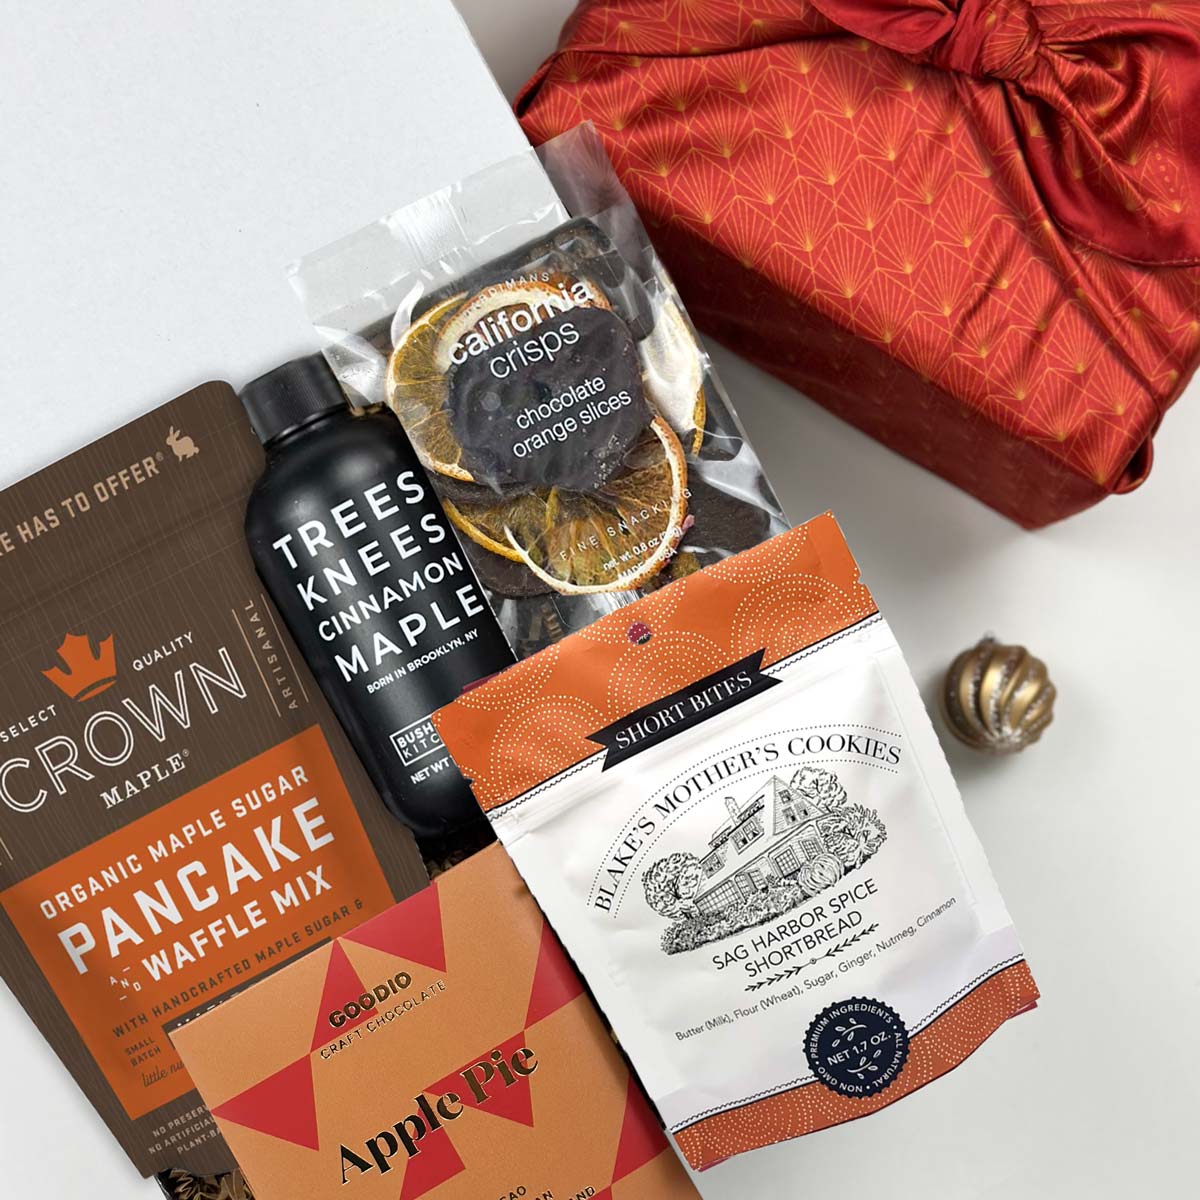 kadoo gourmet pancake holiday gift box wrapped in furoshiki fabric, with pancake & waffle mix, cinnamon maple syrup, apple pie chocolate, cookie and more